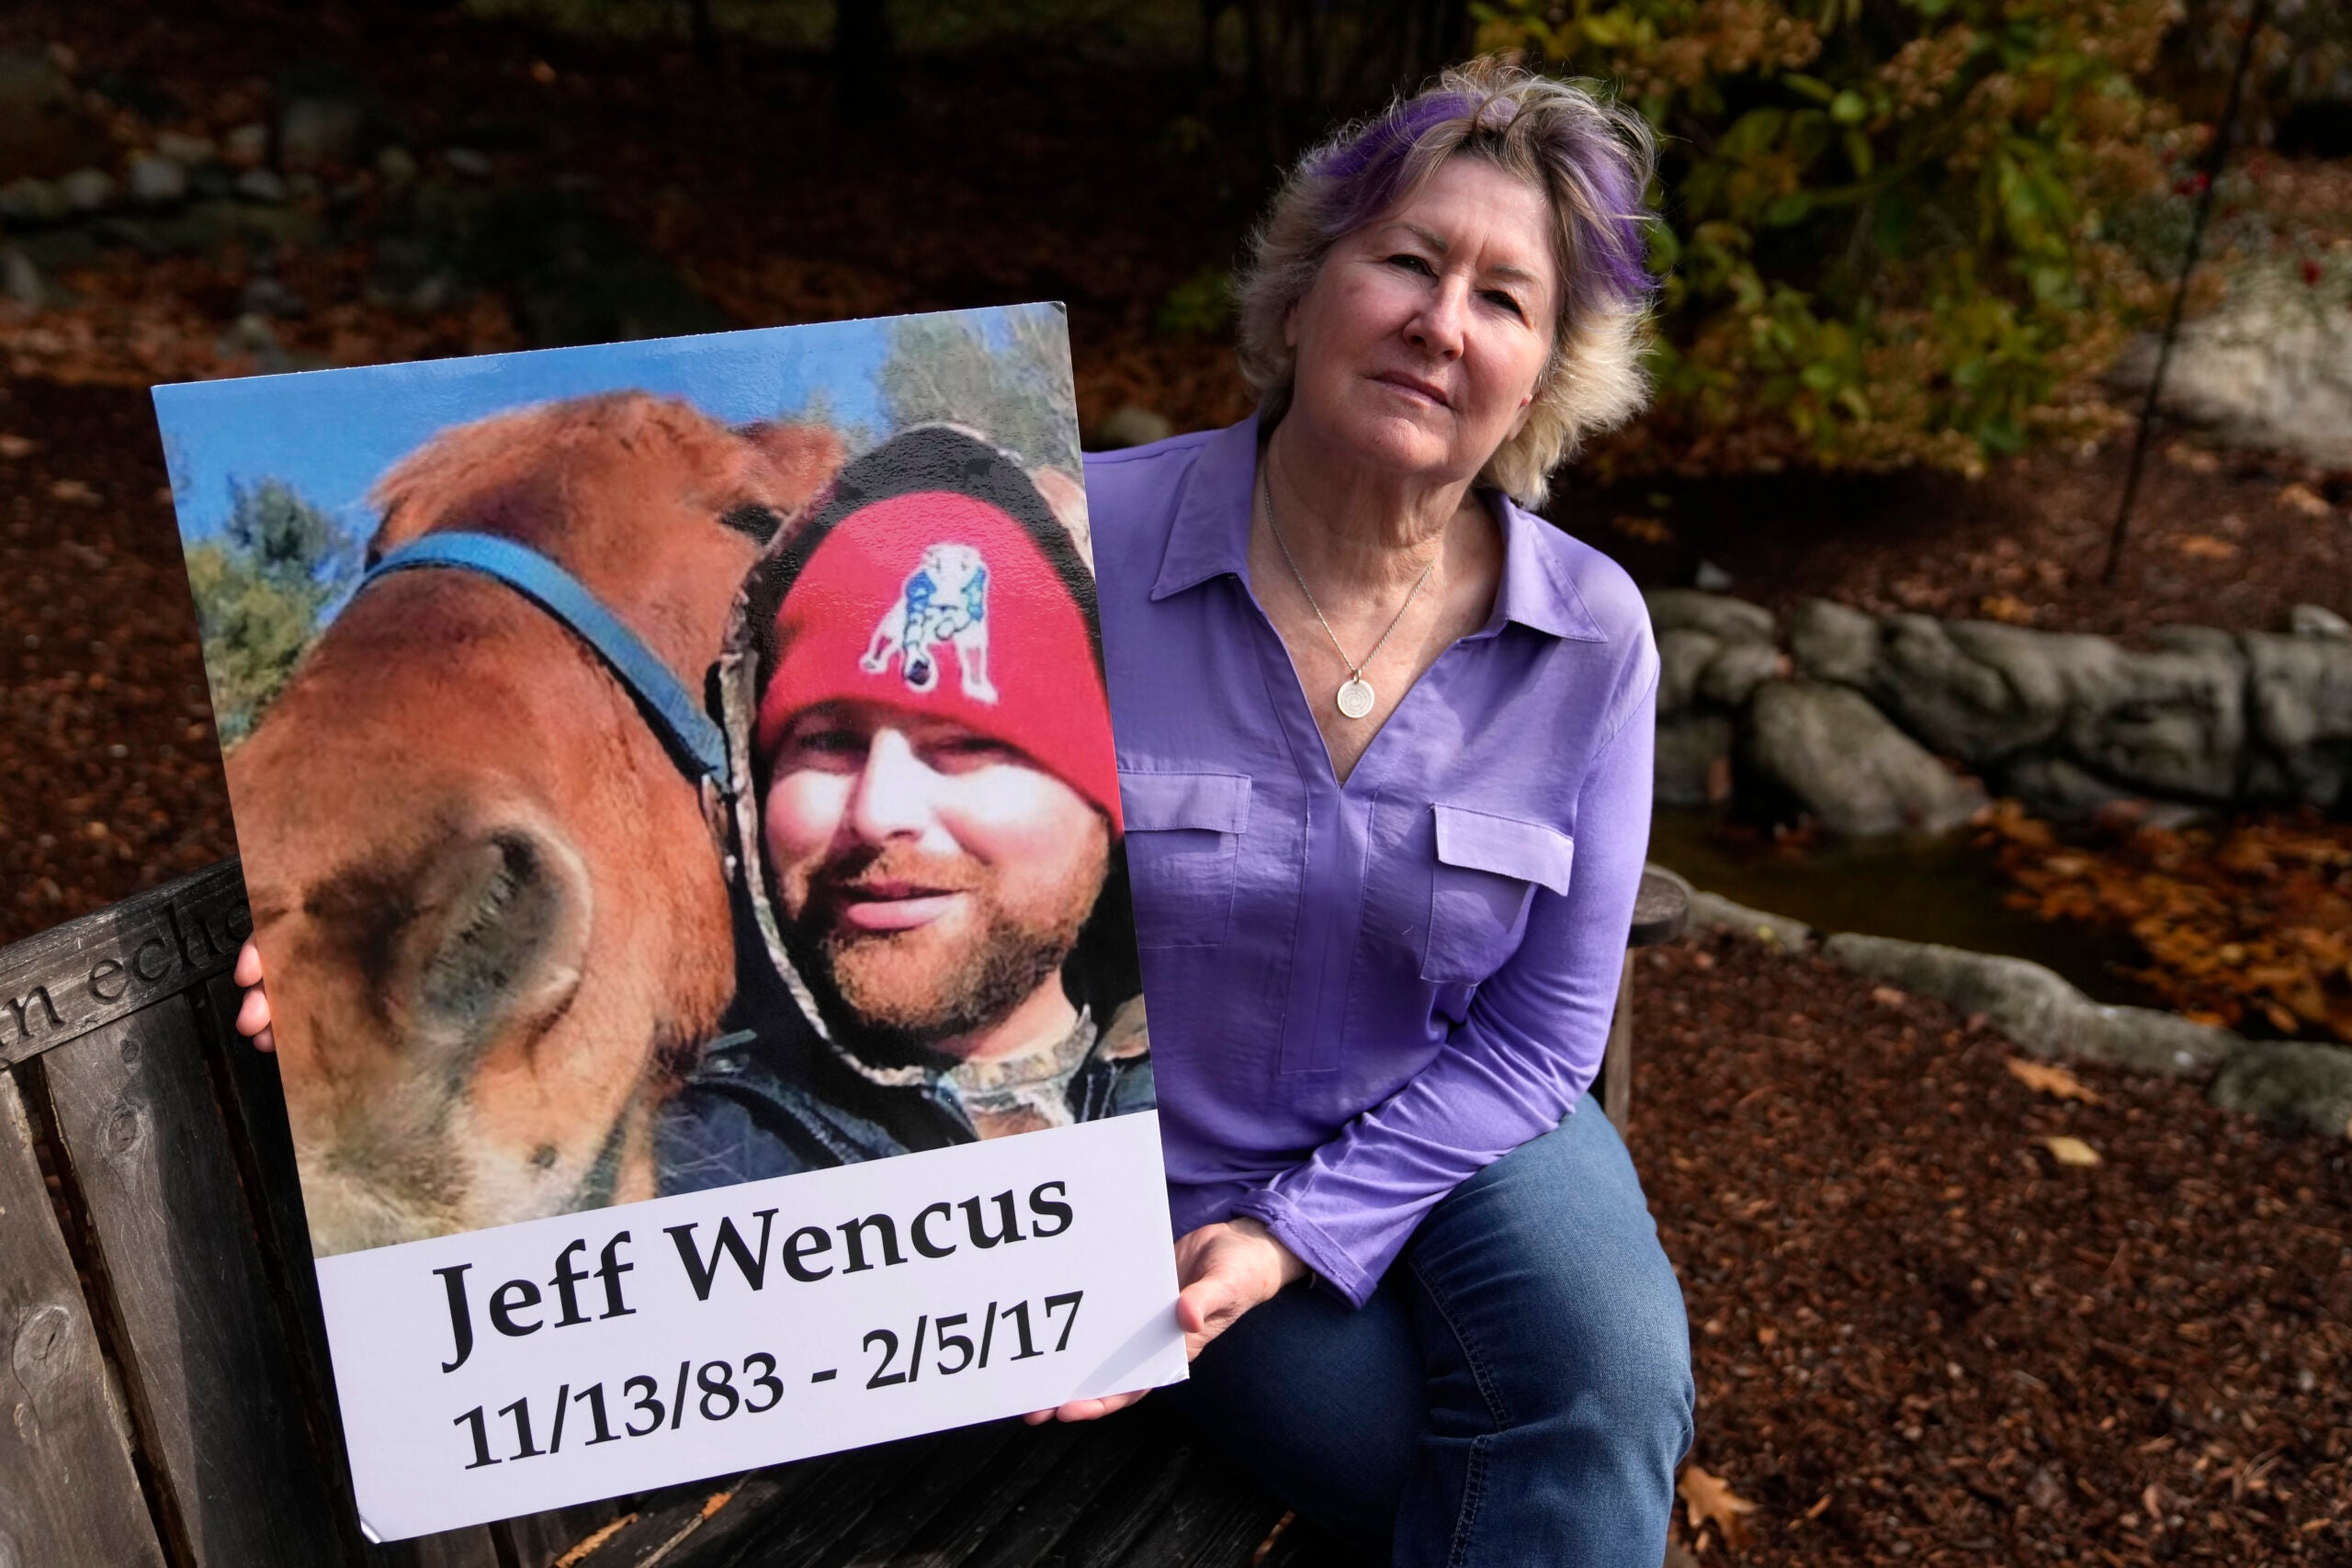 Lynn Wencus, of Wrentham, Mass., holds a photograph of her son Jeff while seated in a garden at her home.